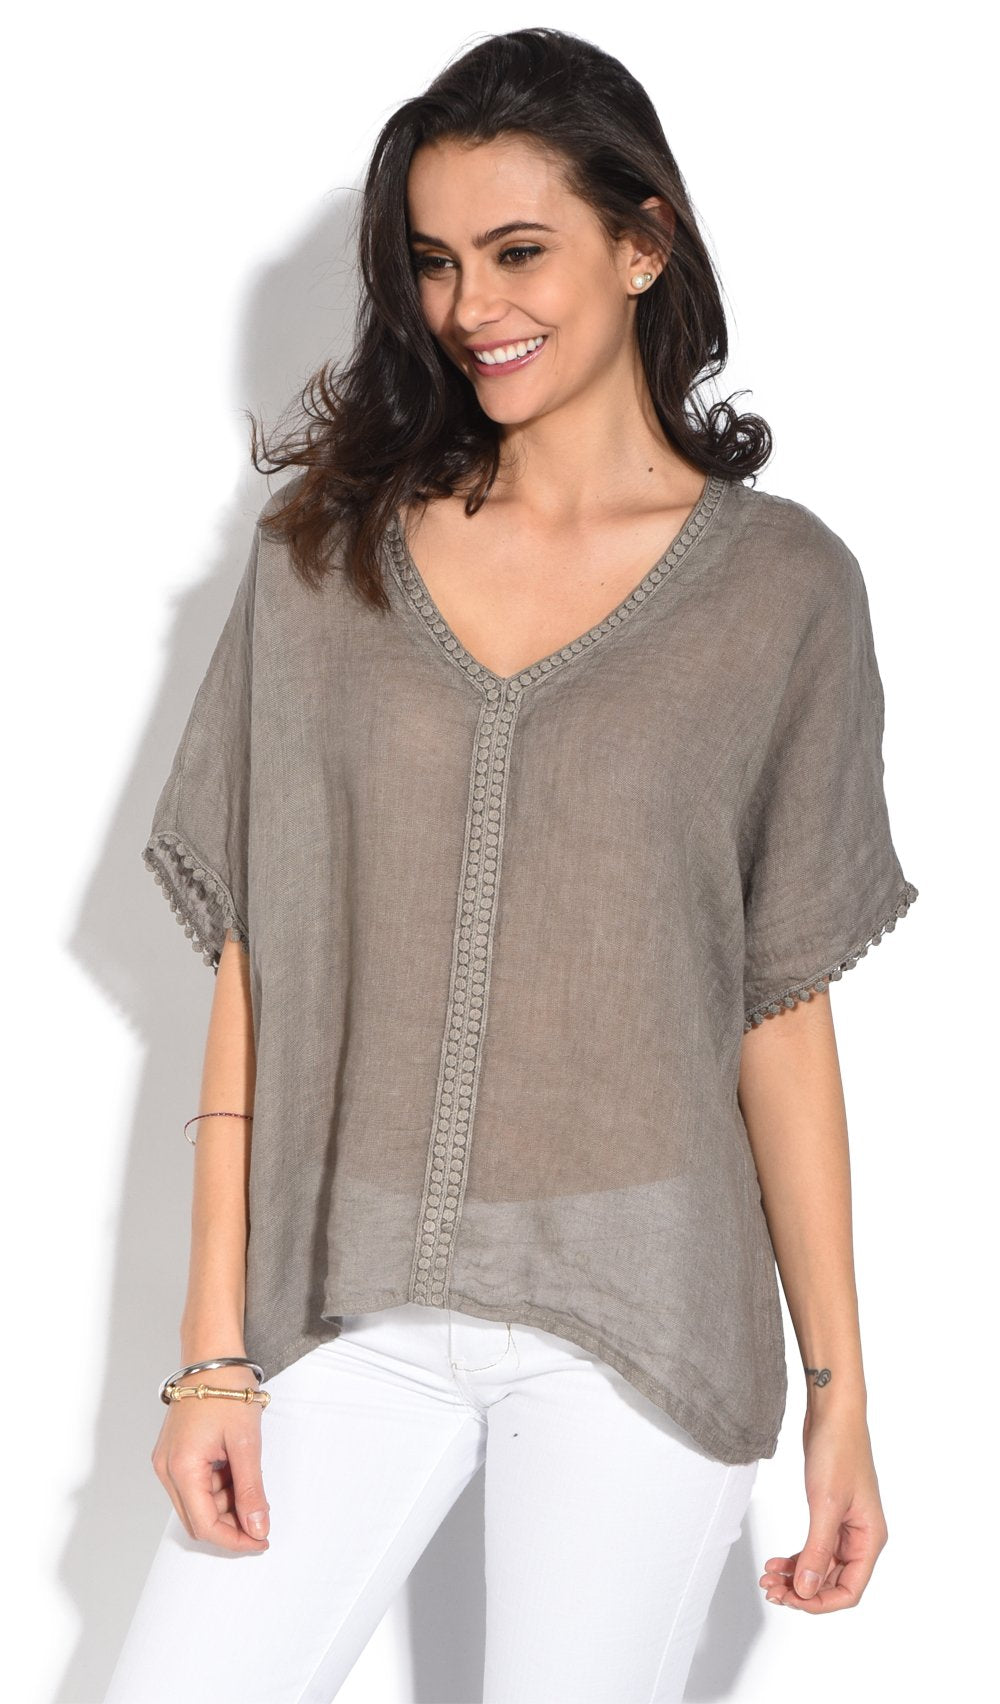 SEMI-TRANSPARENT TOP WITH V-NECK AND ENGLISH LACE